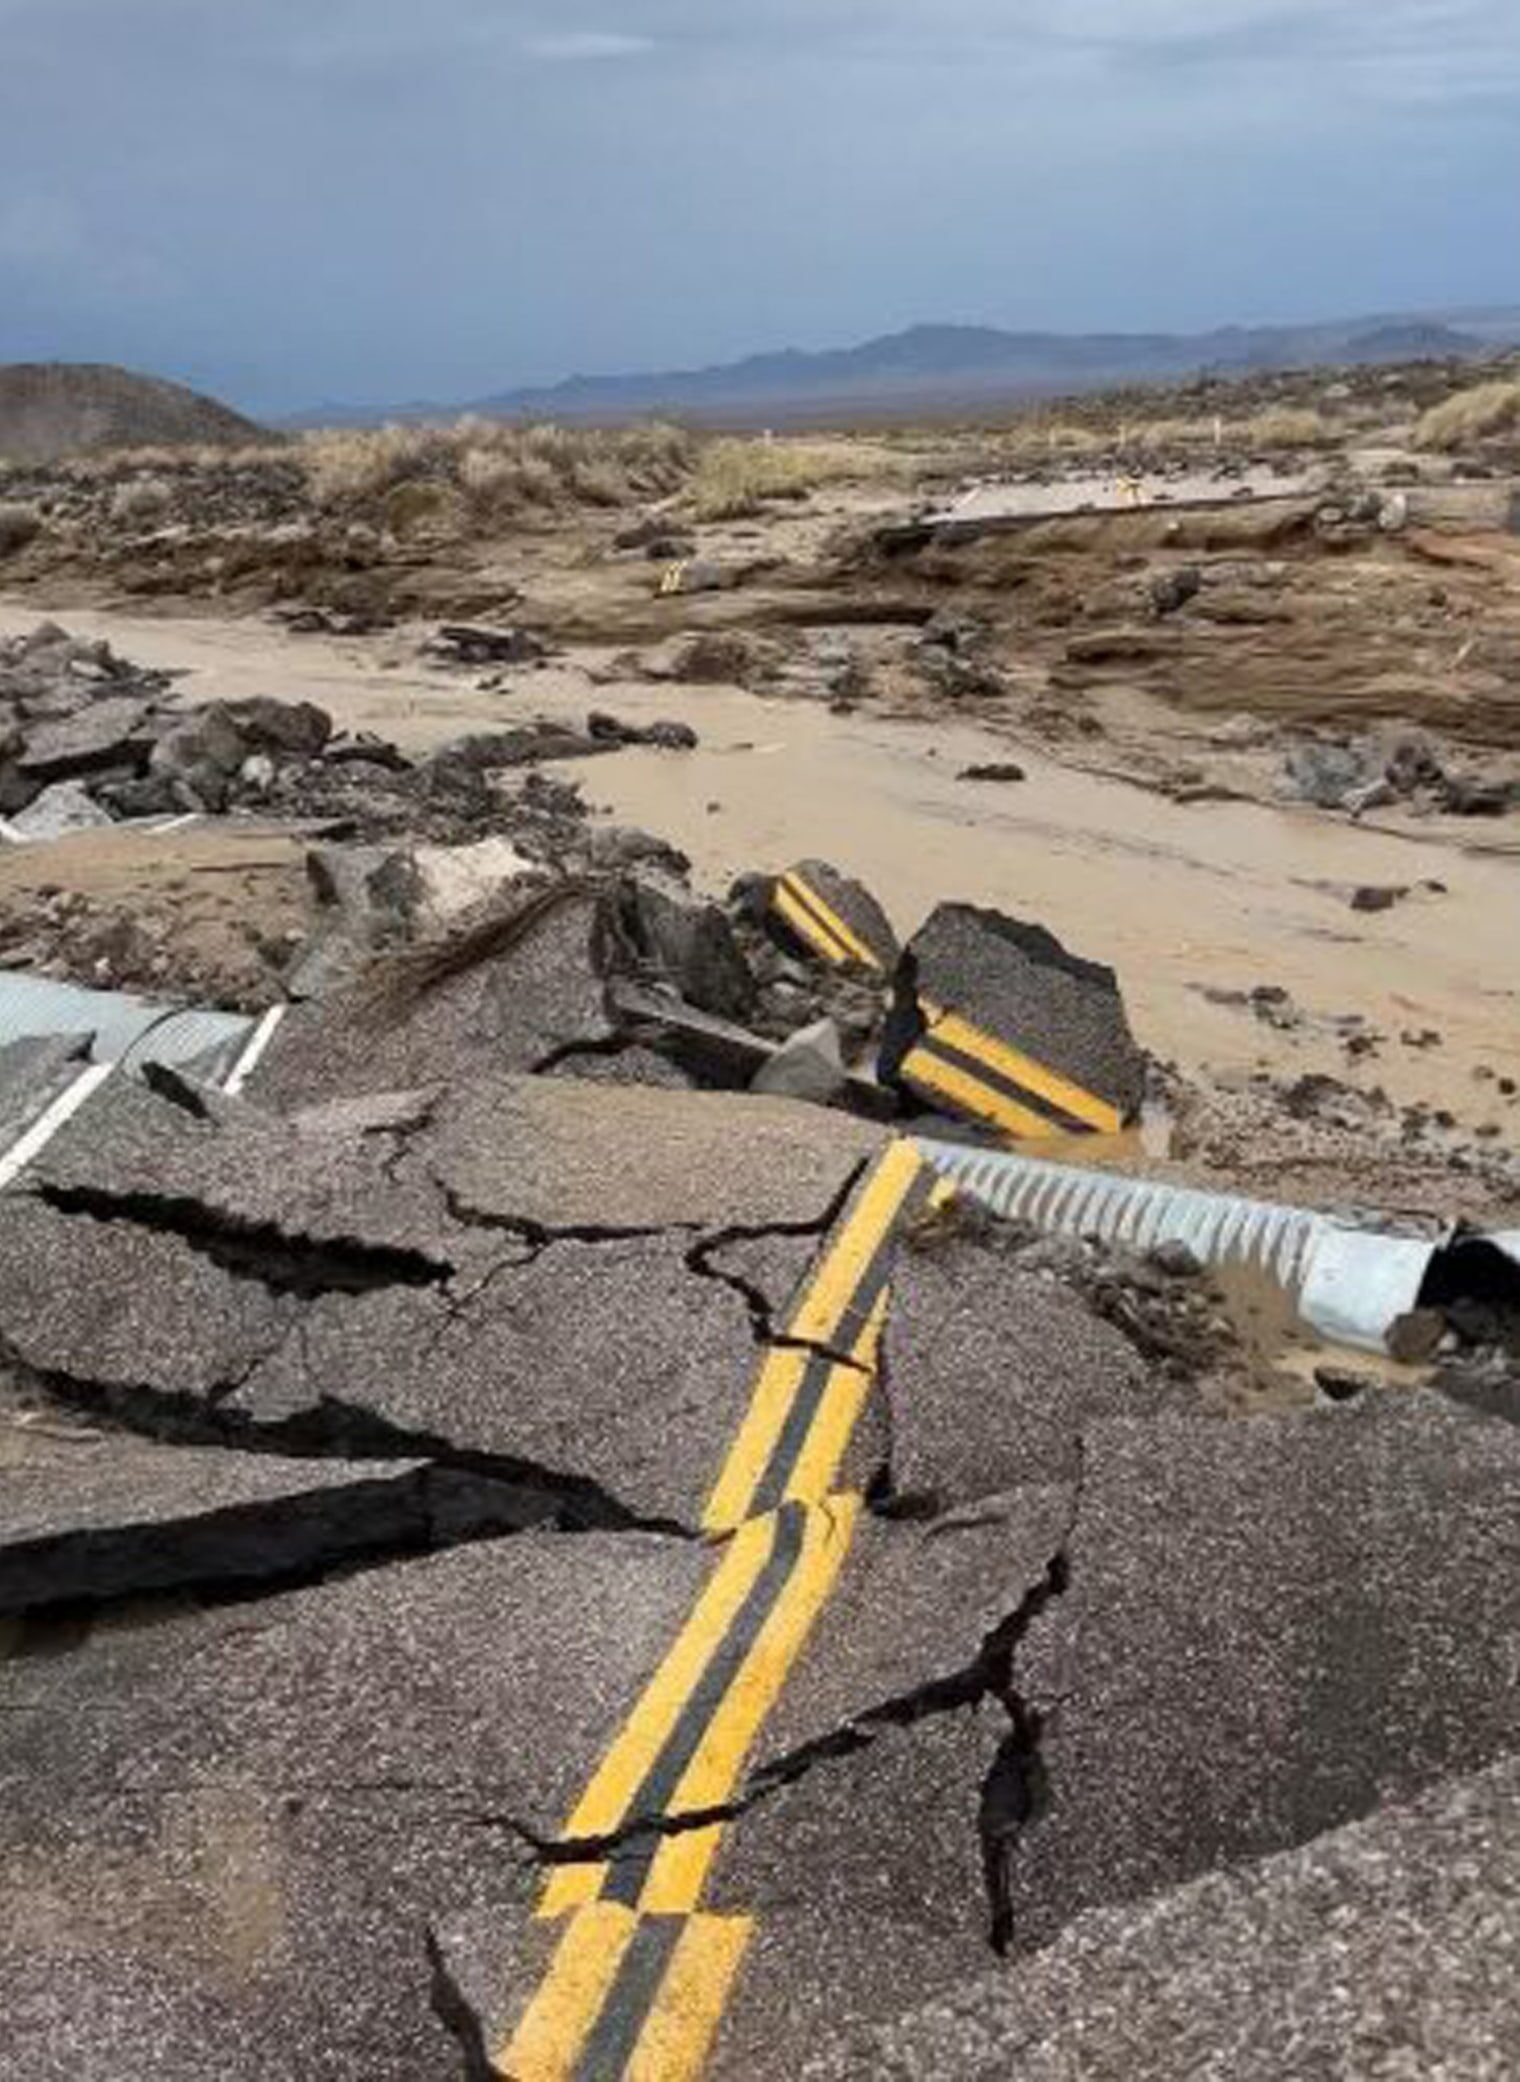 The damaged intersection of Kelbacker Road and Mojave Road in the Mojave National Preserve, Calif., on July 31, 2022.